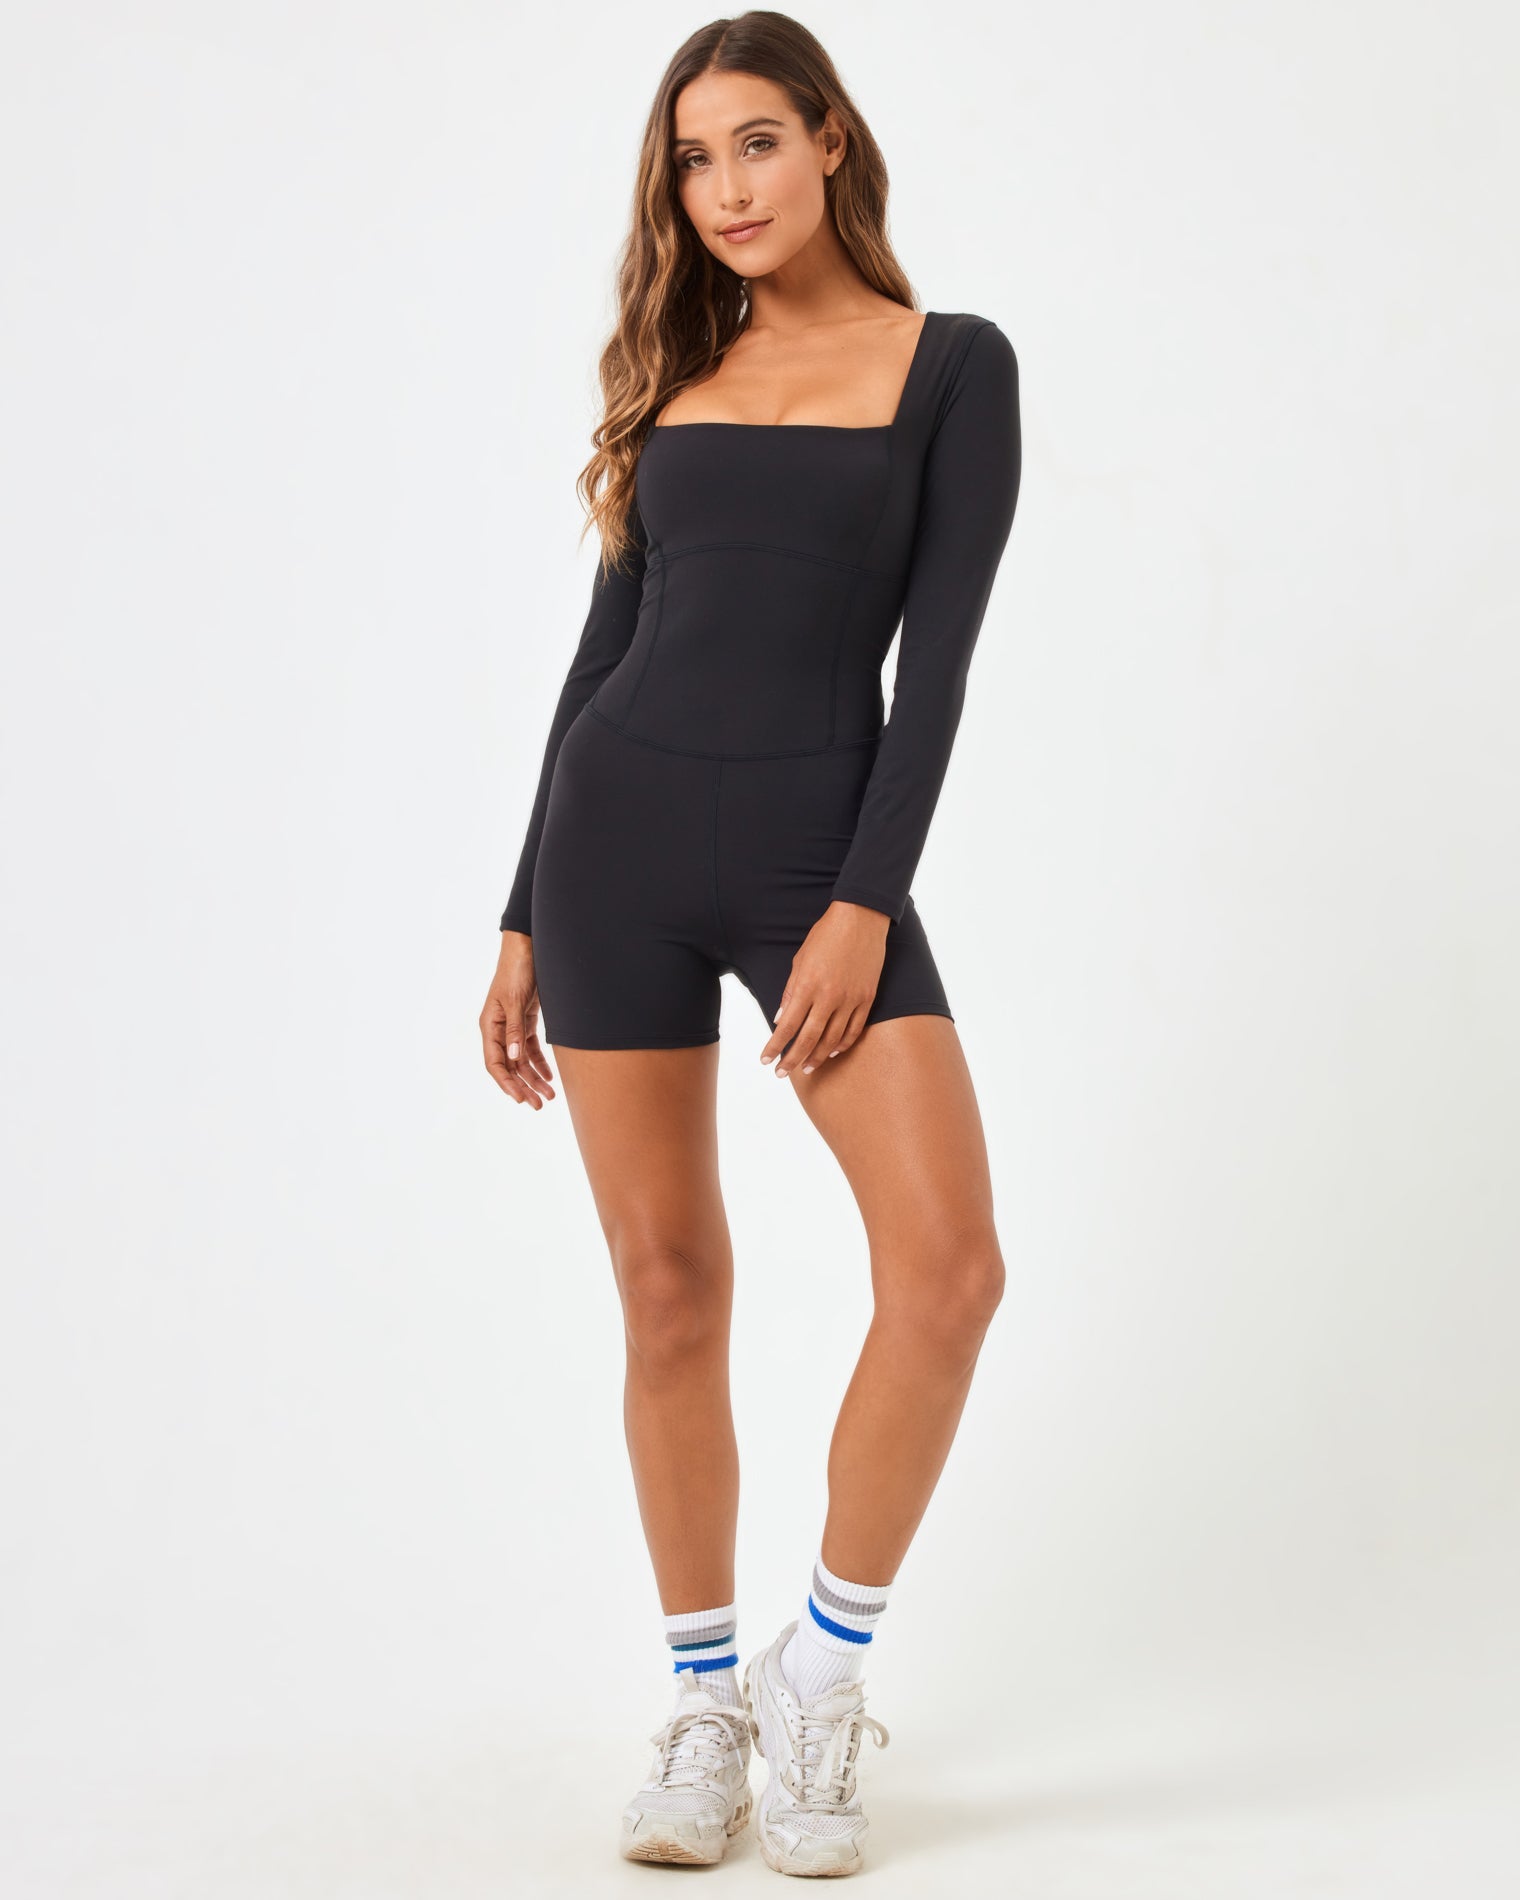 Product  LSPACE Allister Romper